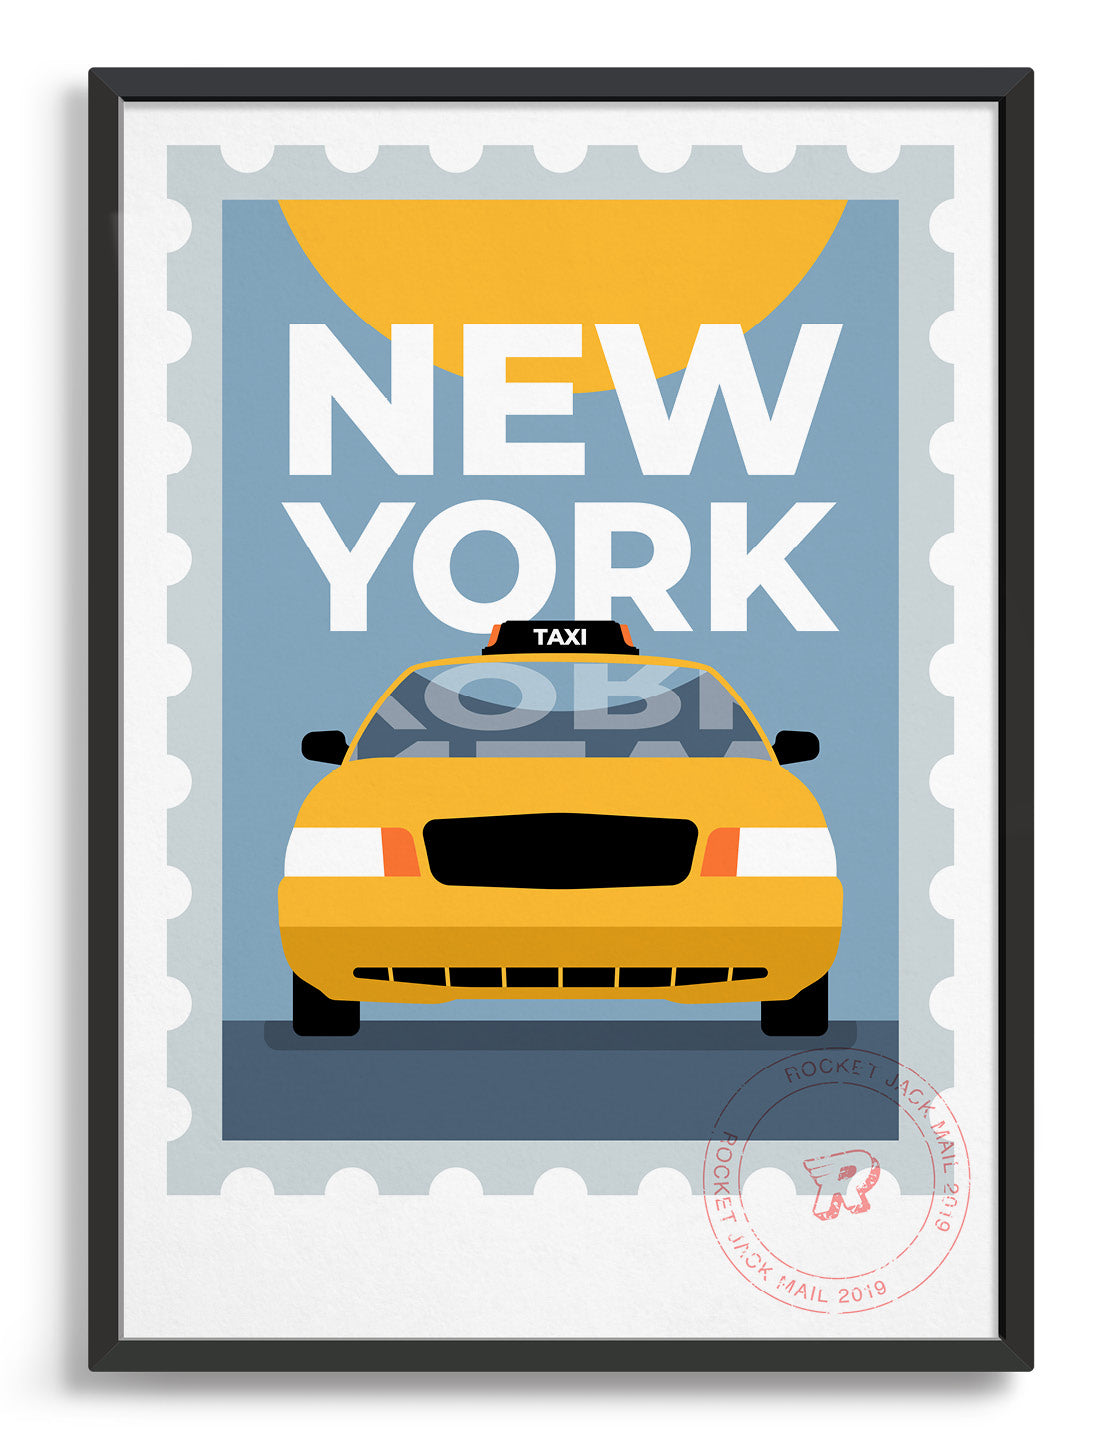 New york city travel poster featuring a yellow taxi on a grey and yellow background with bold type